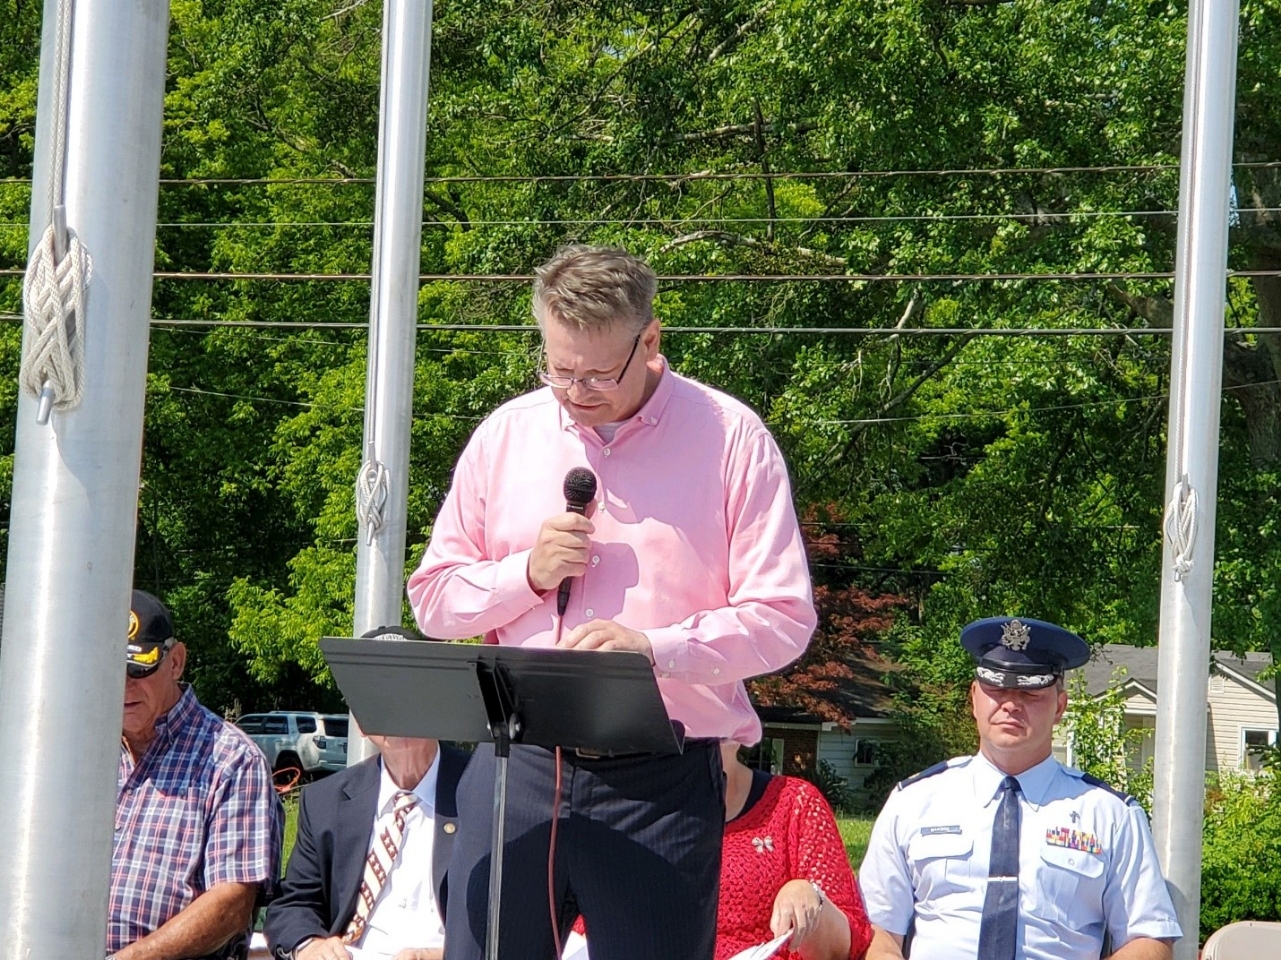 Commander Todd Files, USN Retired, reading the names of all Veterans who is remember at the park. Commander Todd Files served his country in The United Stated Nave for 25 years.